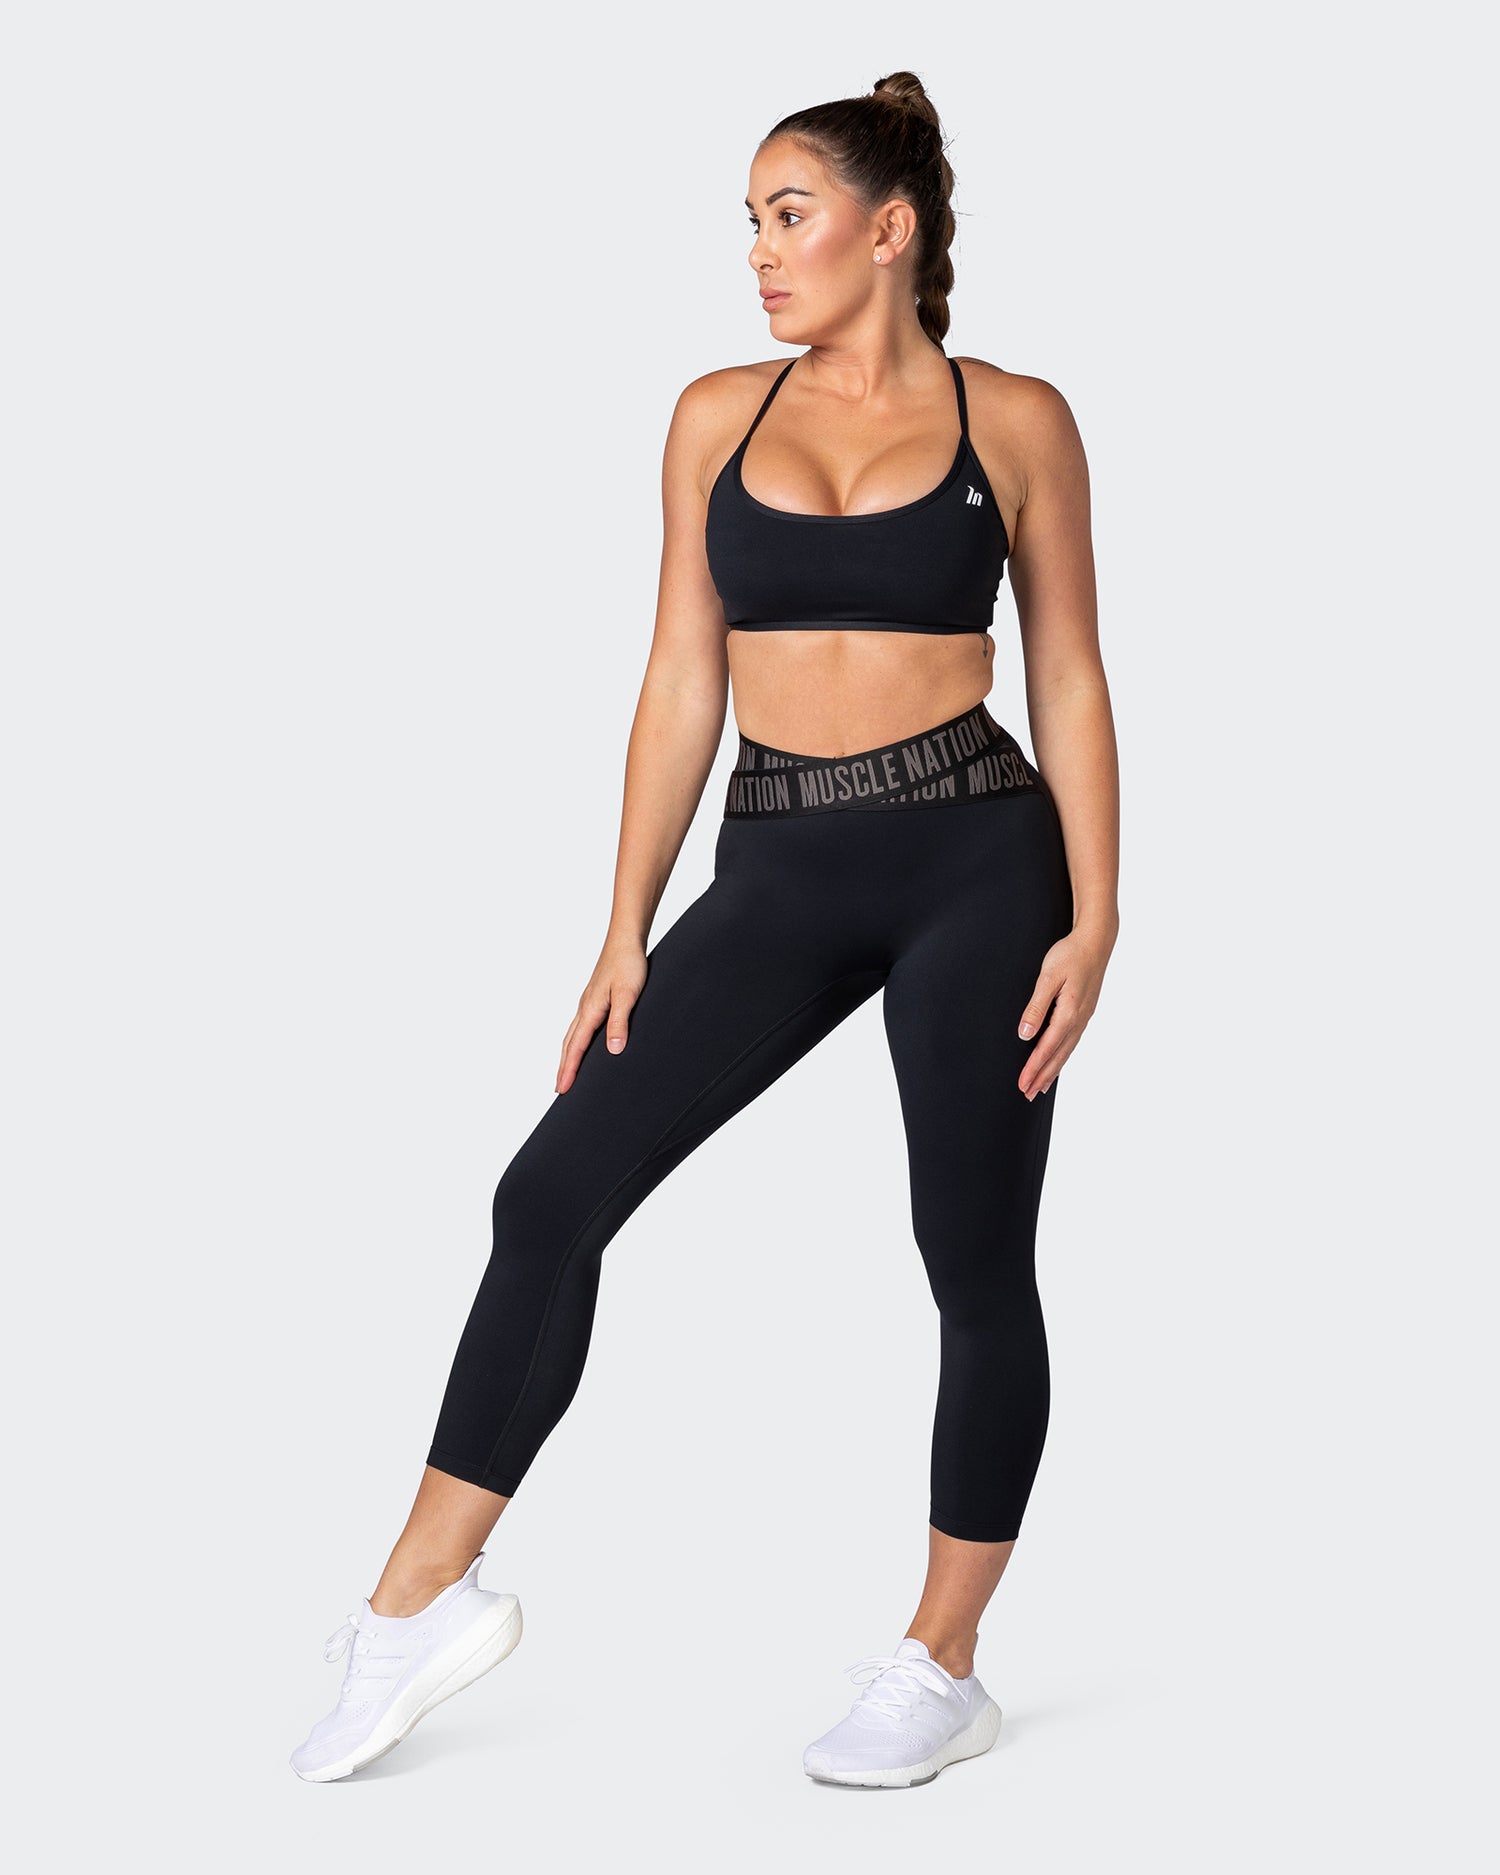 Junior's Cross Faith Black Athletic Workout Leggings Thights One